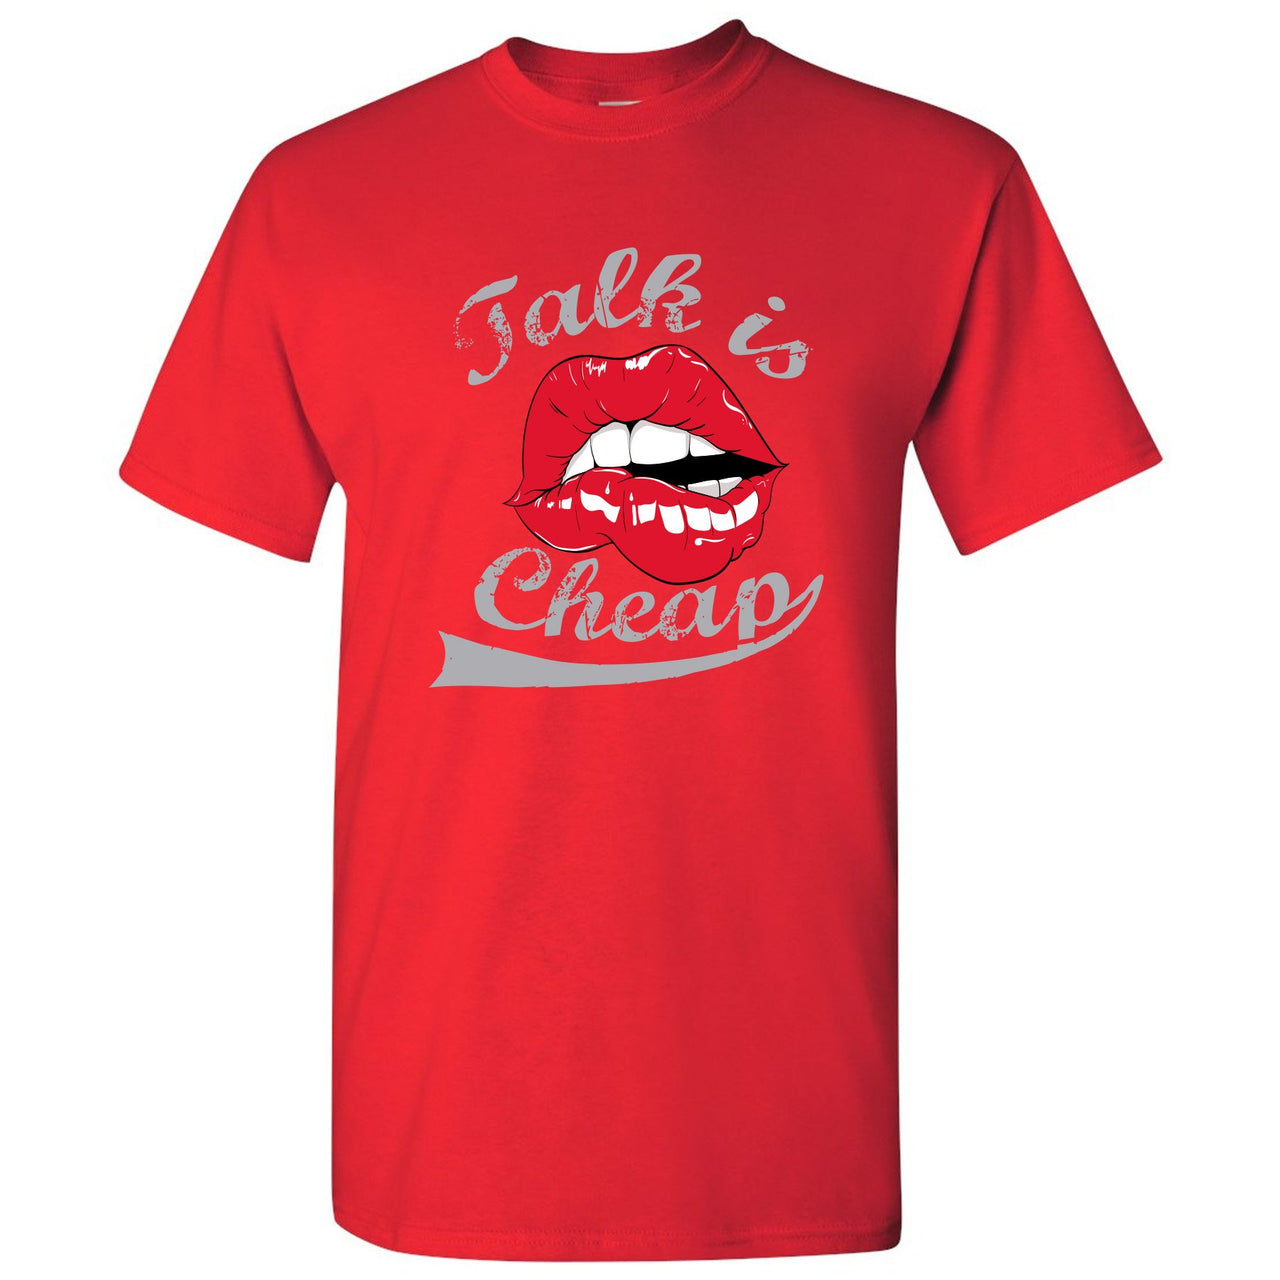 Reflections of a Champion 8s T Shirt | Talking Lips, Red